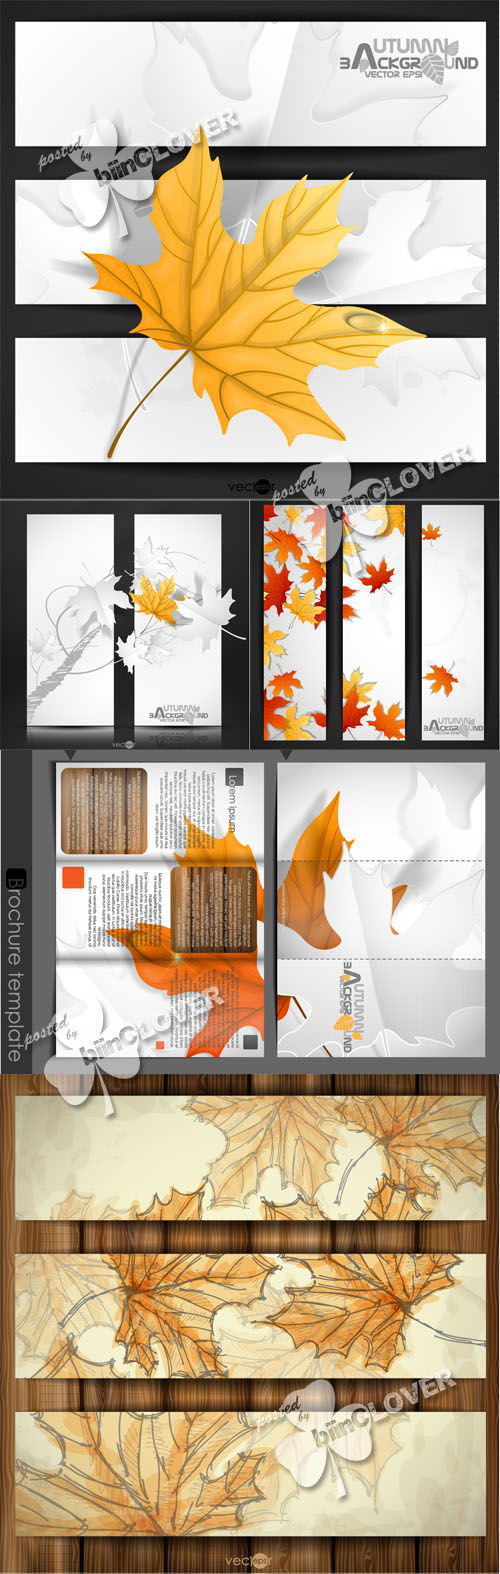 Autumn leaves background 0502